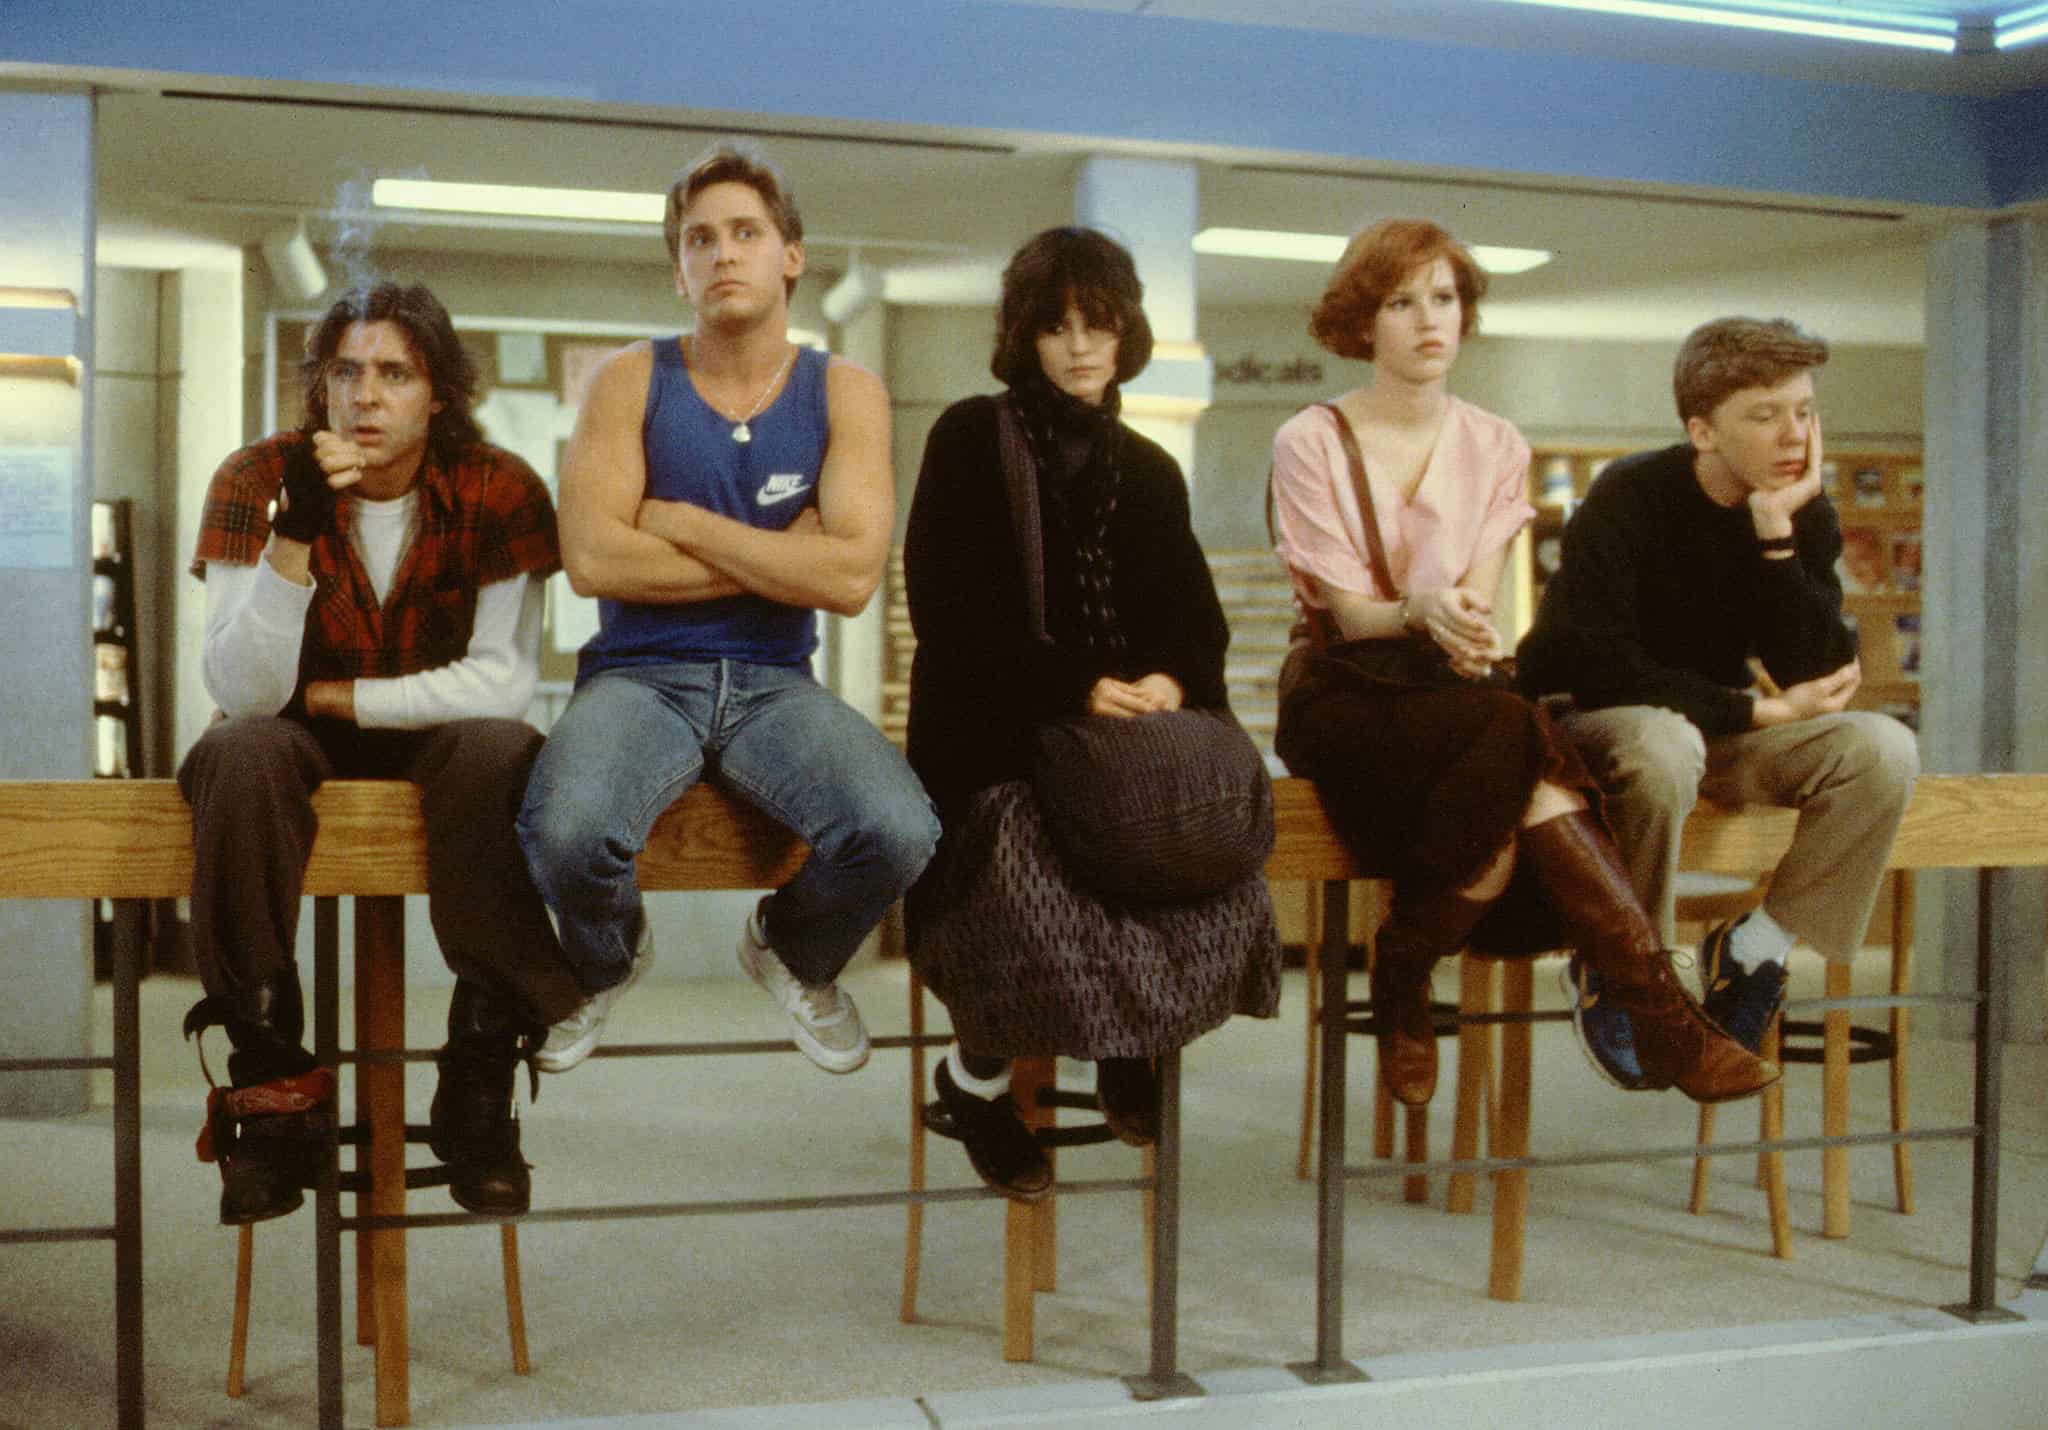 Rebellious teens sit together in a library in this image from A&M Films